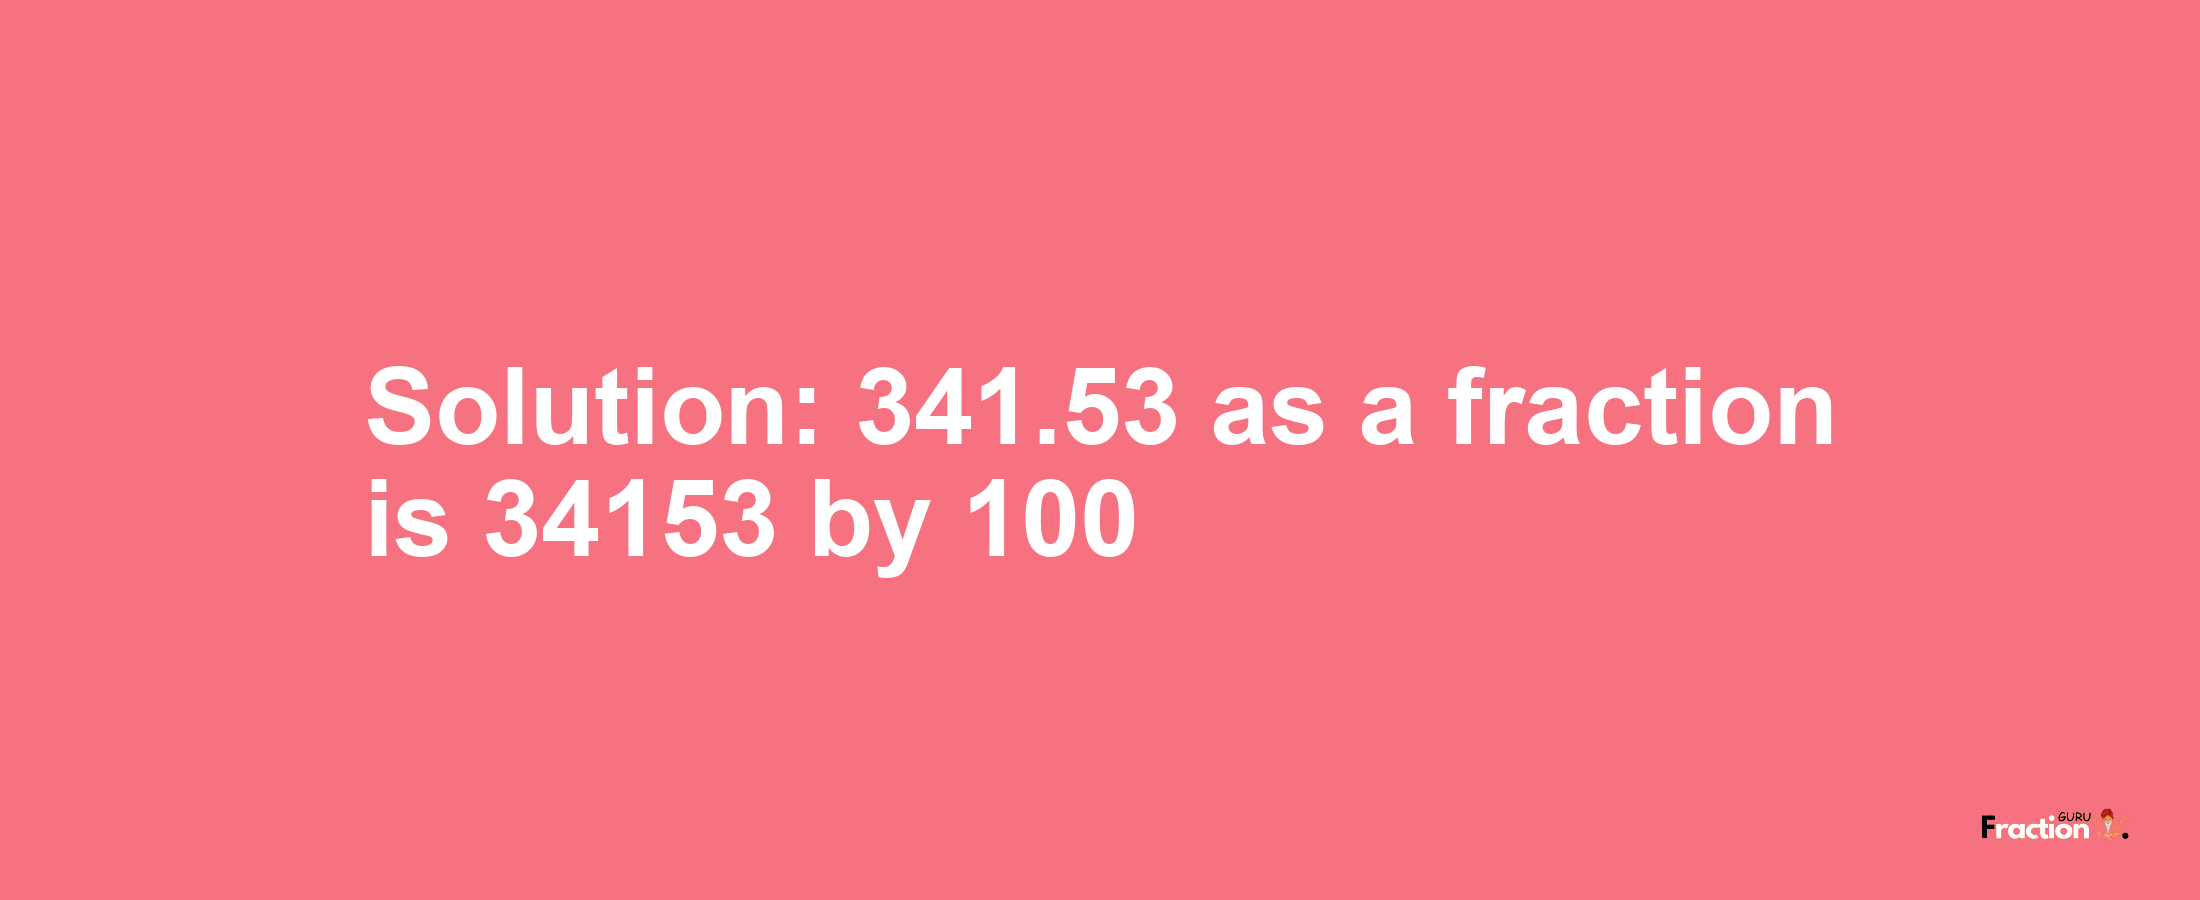 Solution:341.53 as a fraction is 34153/100